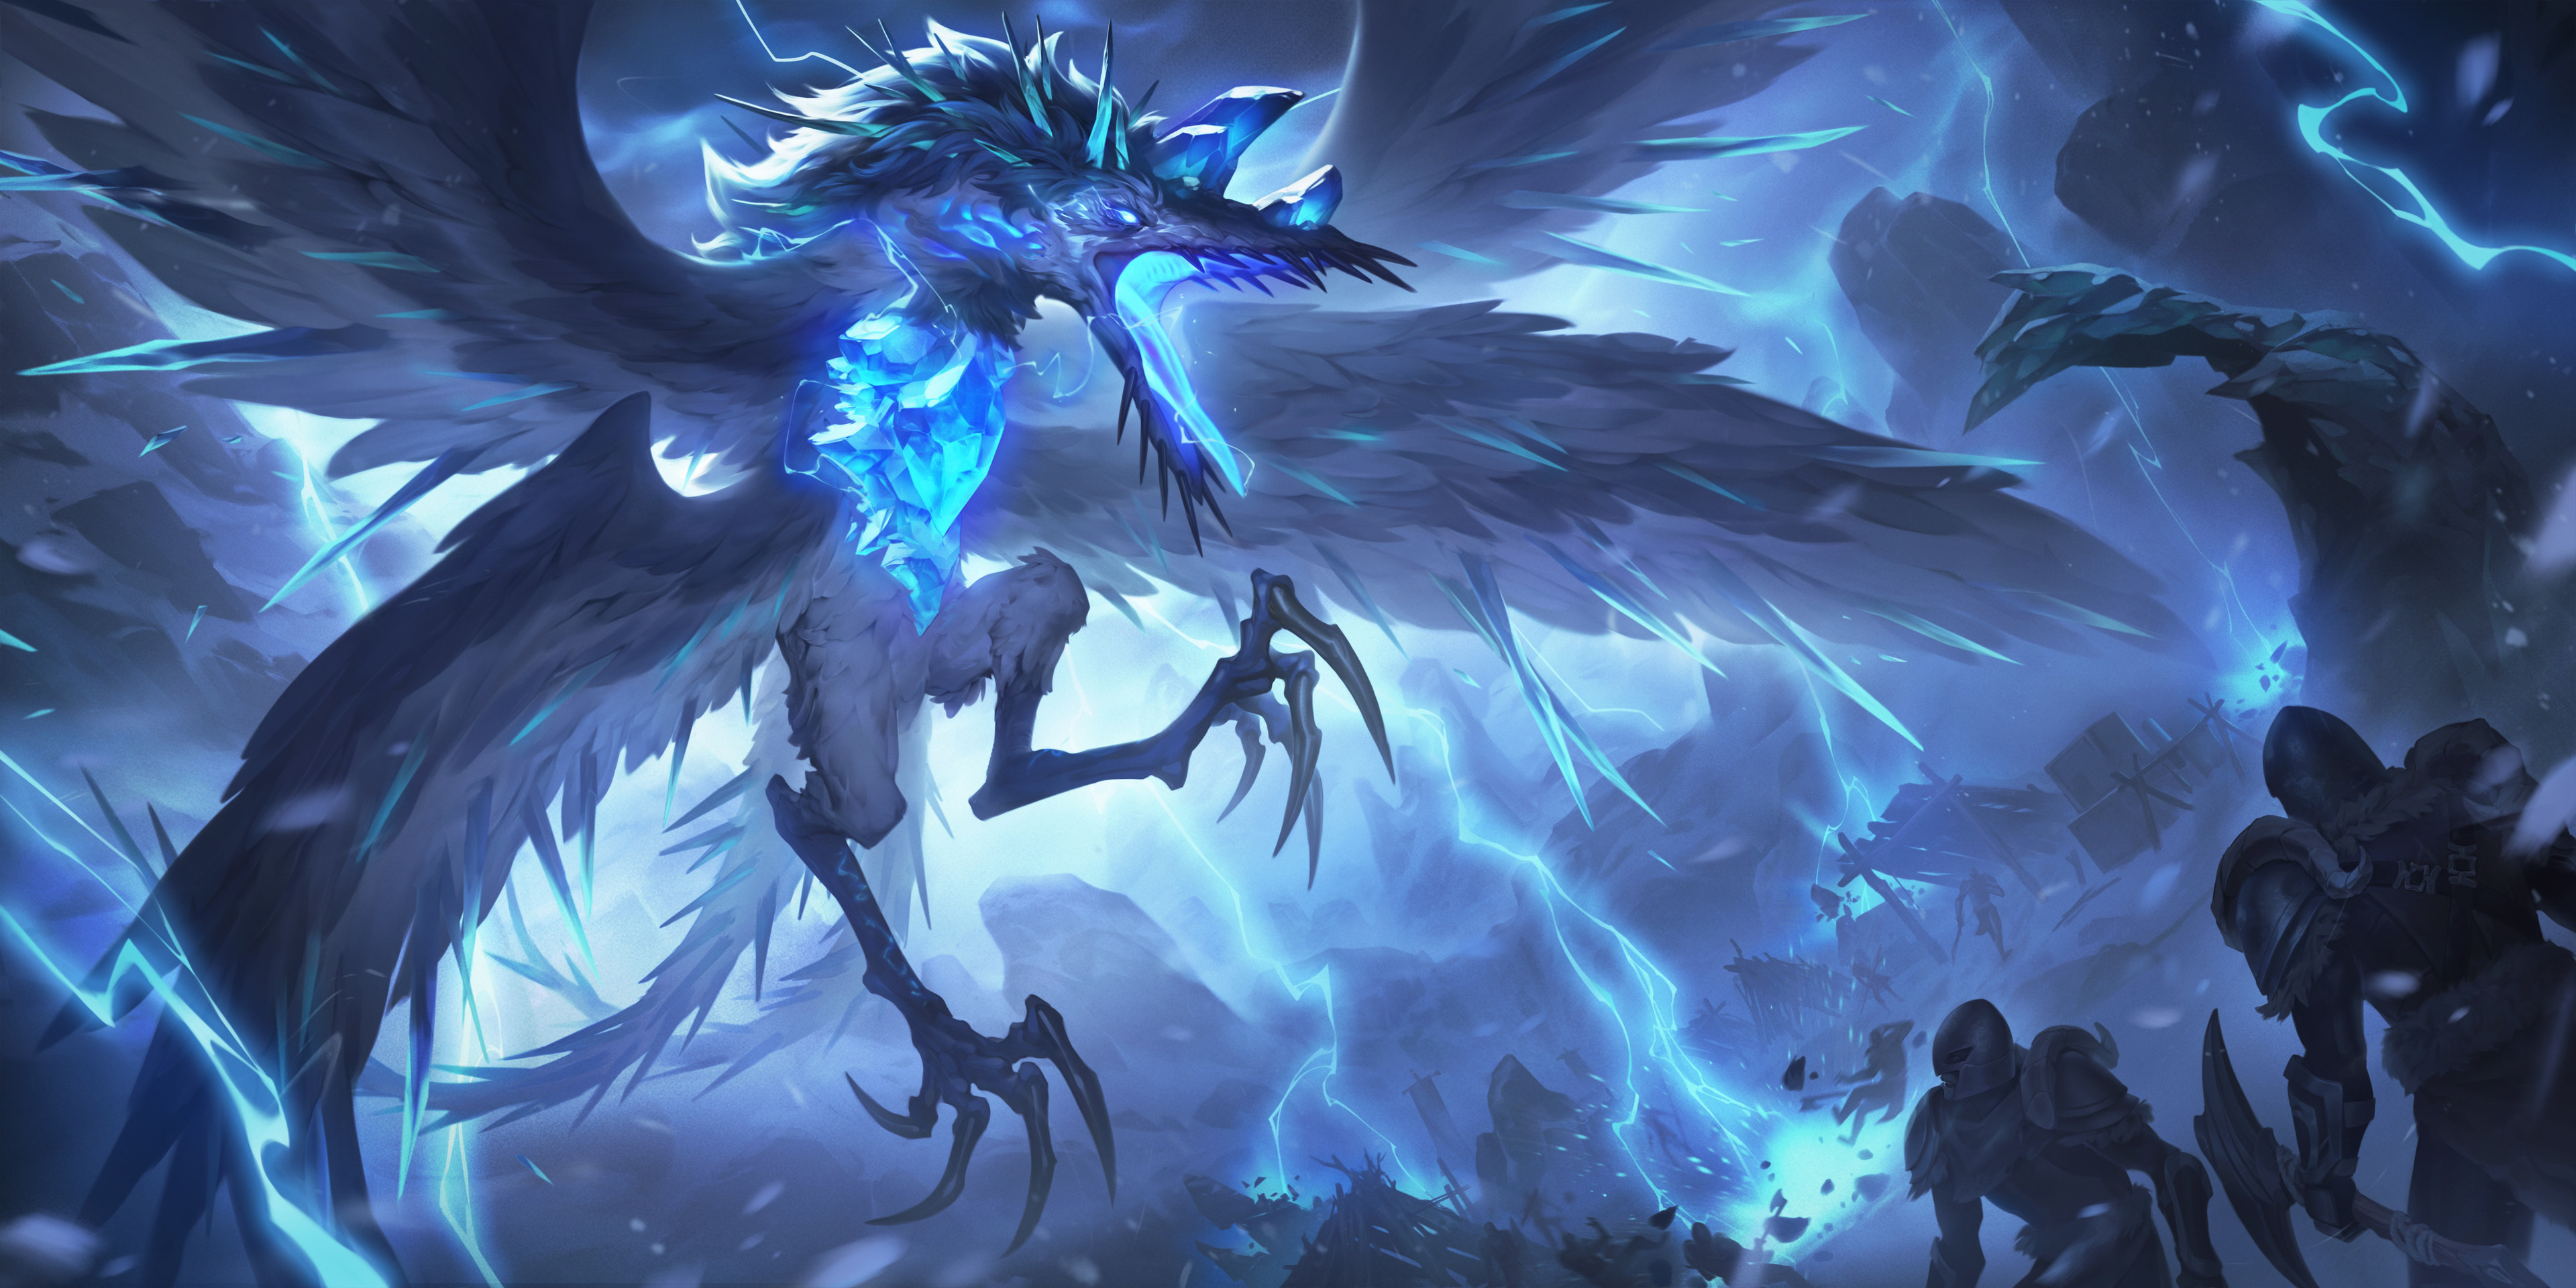 General 3840x1920 Huyy Nguyen drawing dragon fantasy art icicle digital art birds Legends of Runeterra Crystalline Stormraptor open mouth lightning armor claws wings blue creature men weapon video games video game art crystal  spikes